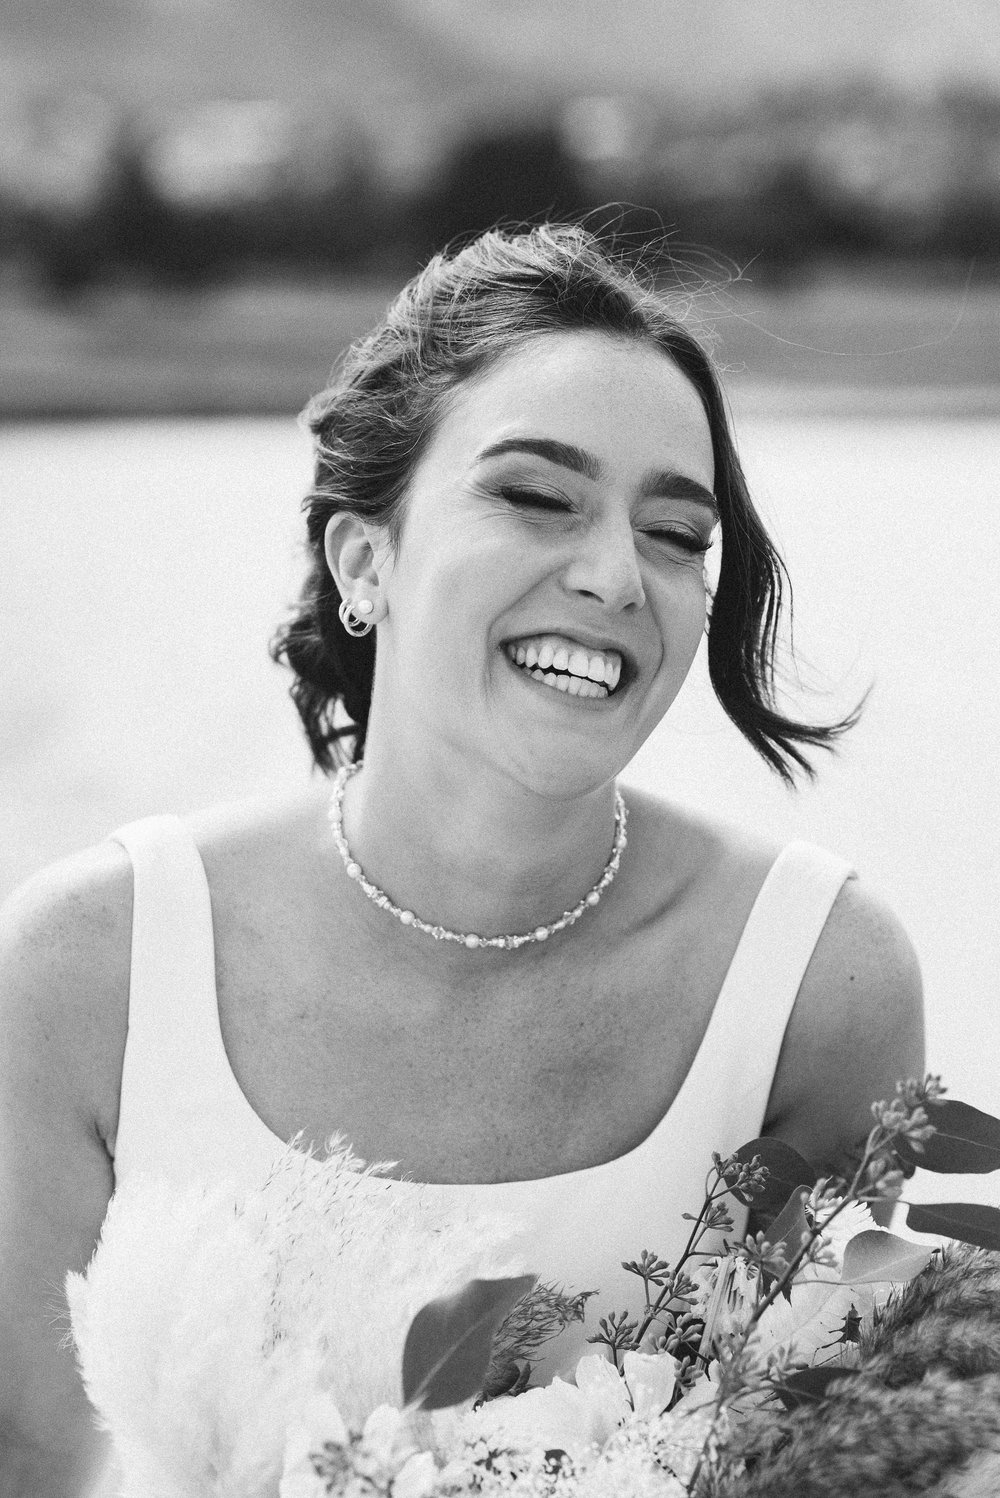  candid photo of a bride laughing on her wedding day 